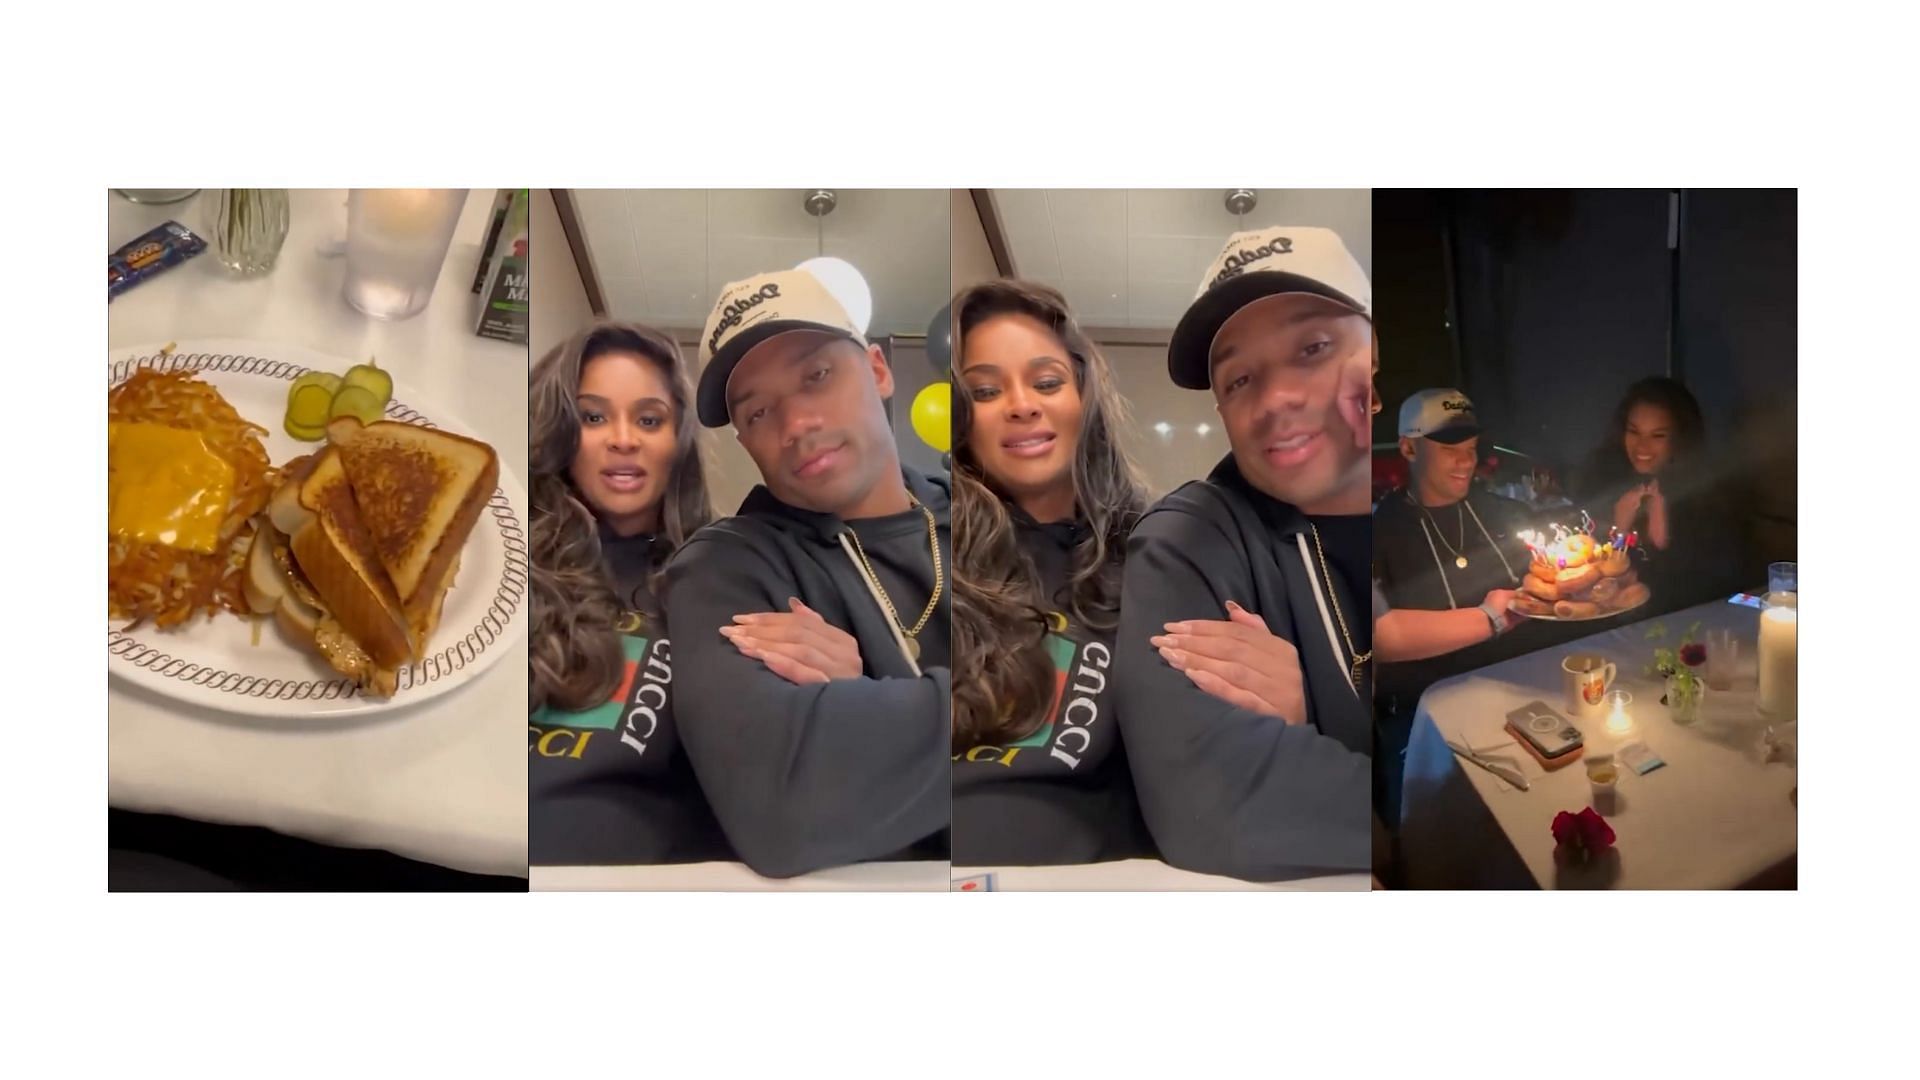 Russell Wilson Surprises Wife, Ciara, by Renting Out Waffle House